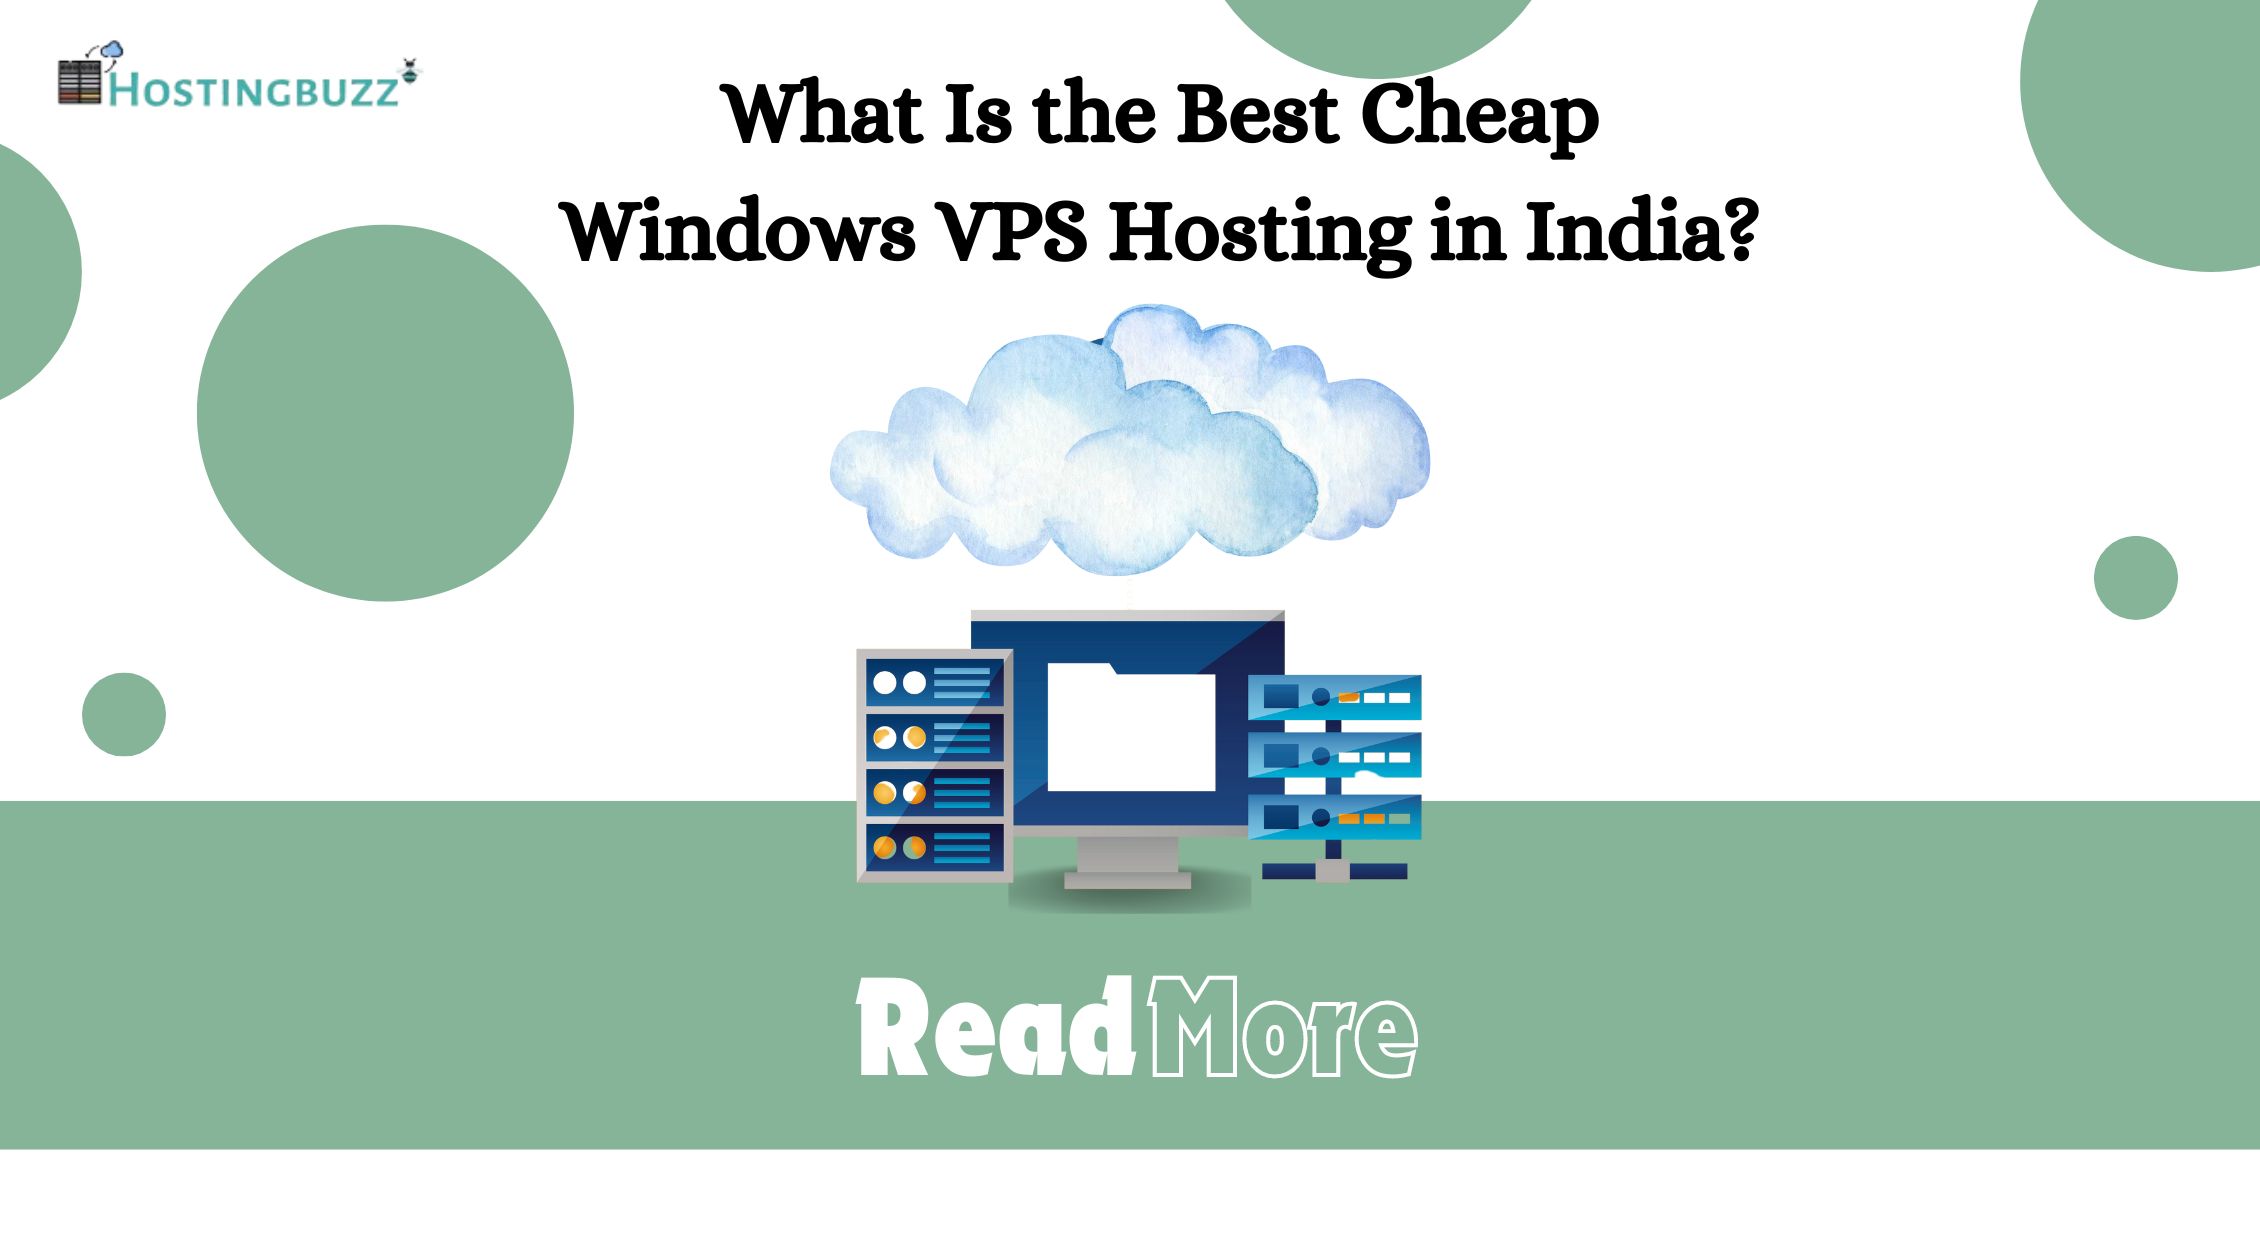 the best cheap Windows VPS hosting in India. Find affordable, reliable Windows VPS servers .Save money and boost performance.